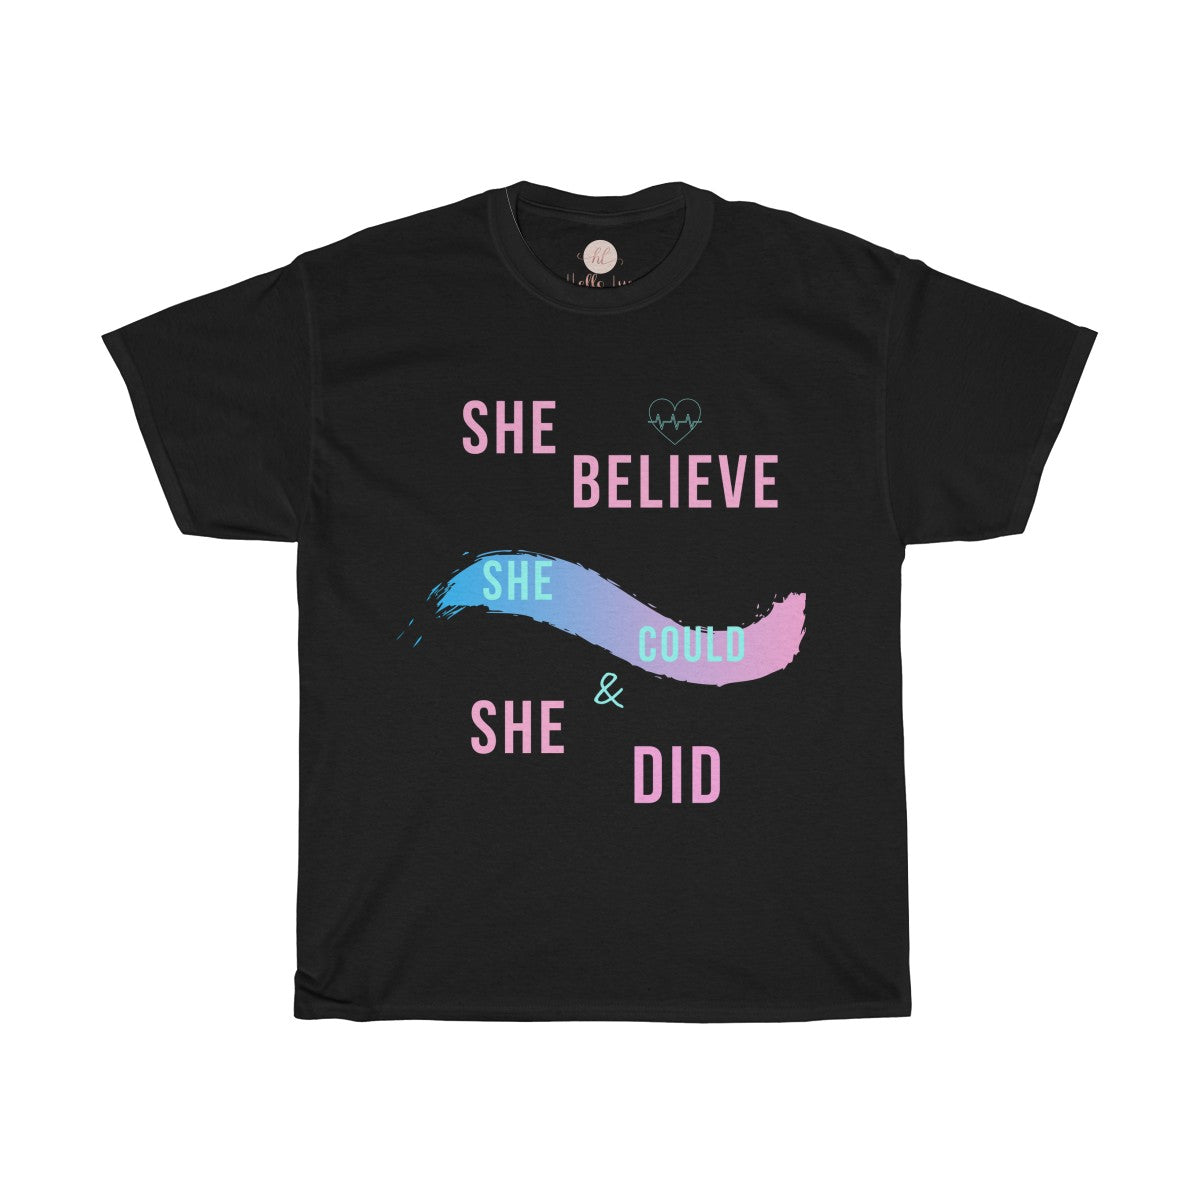 She Believe, She Could So She Did Tee| Believe Tee| Girl Believer T-shirt|